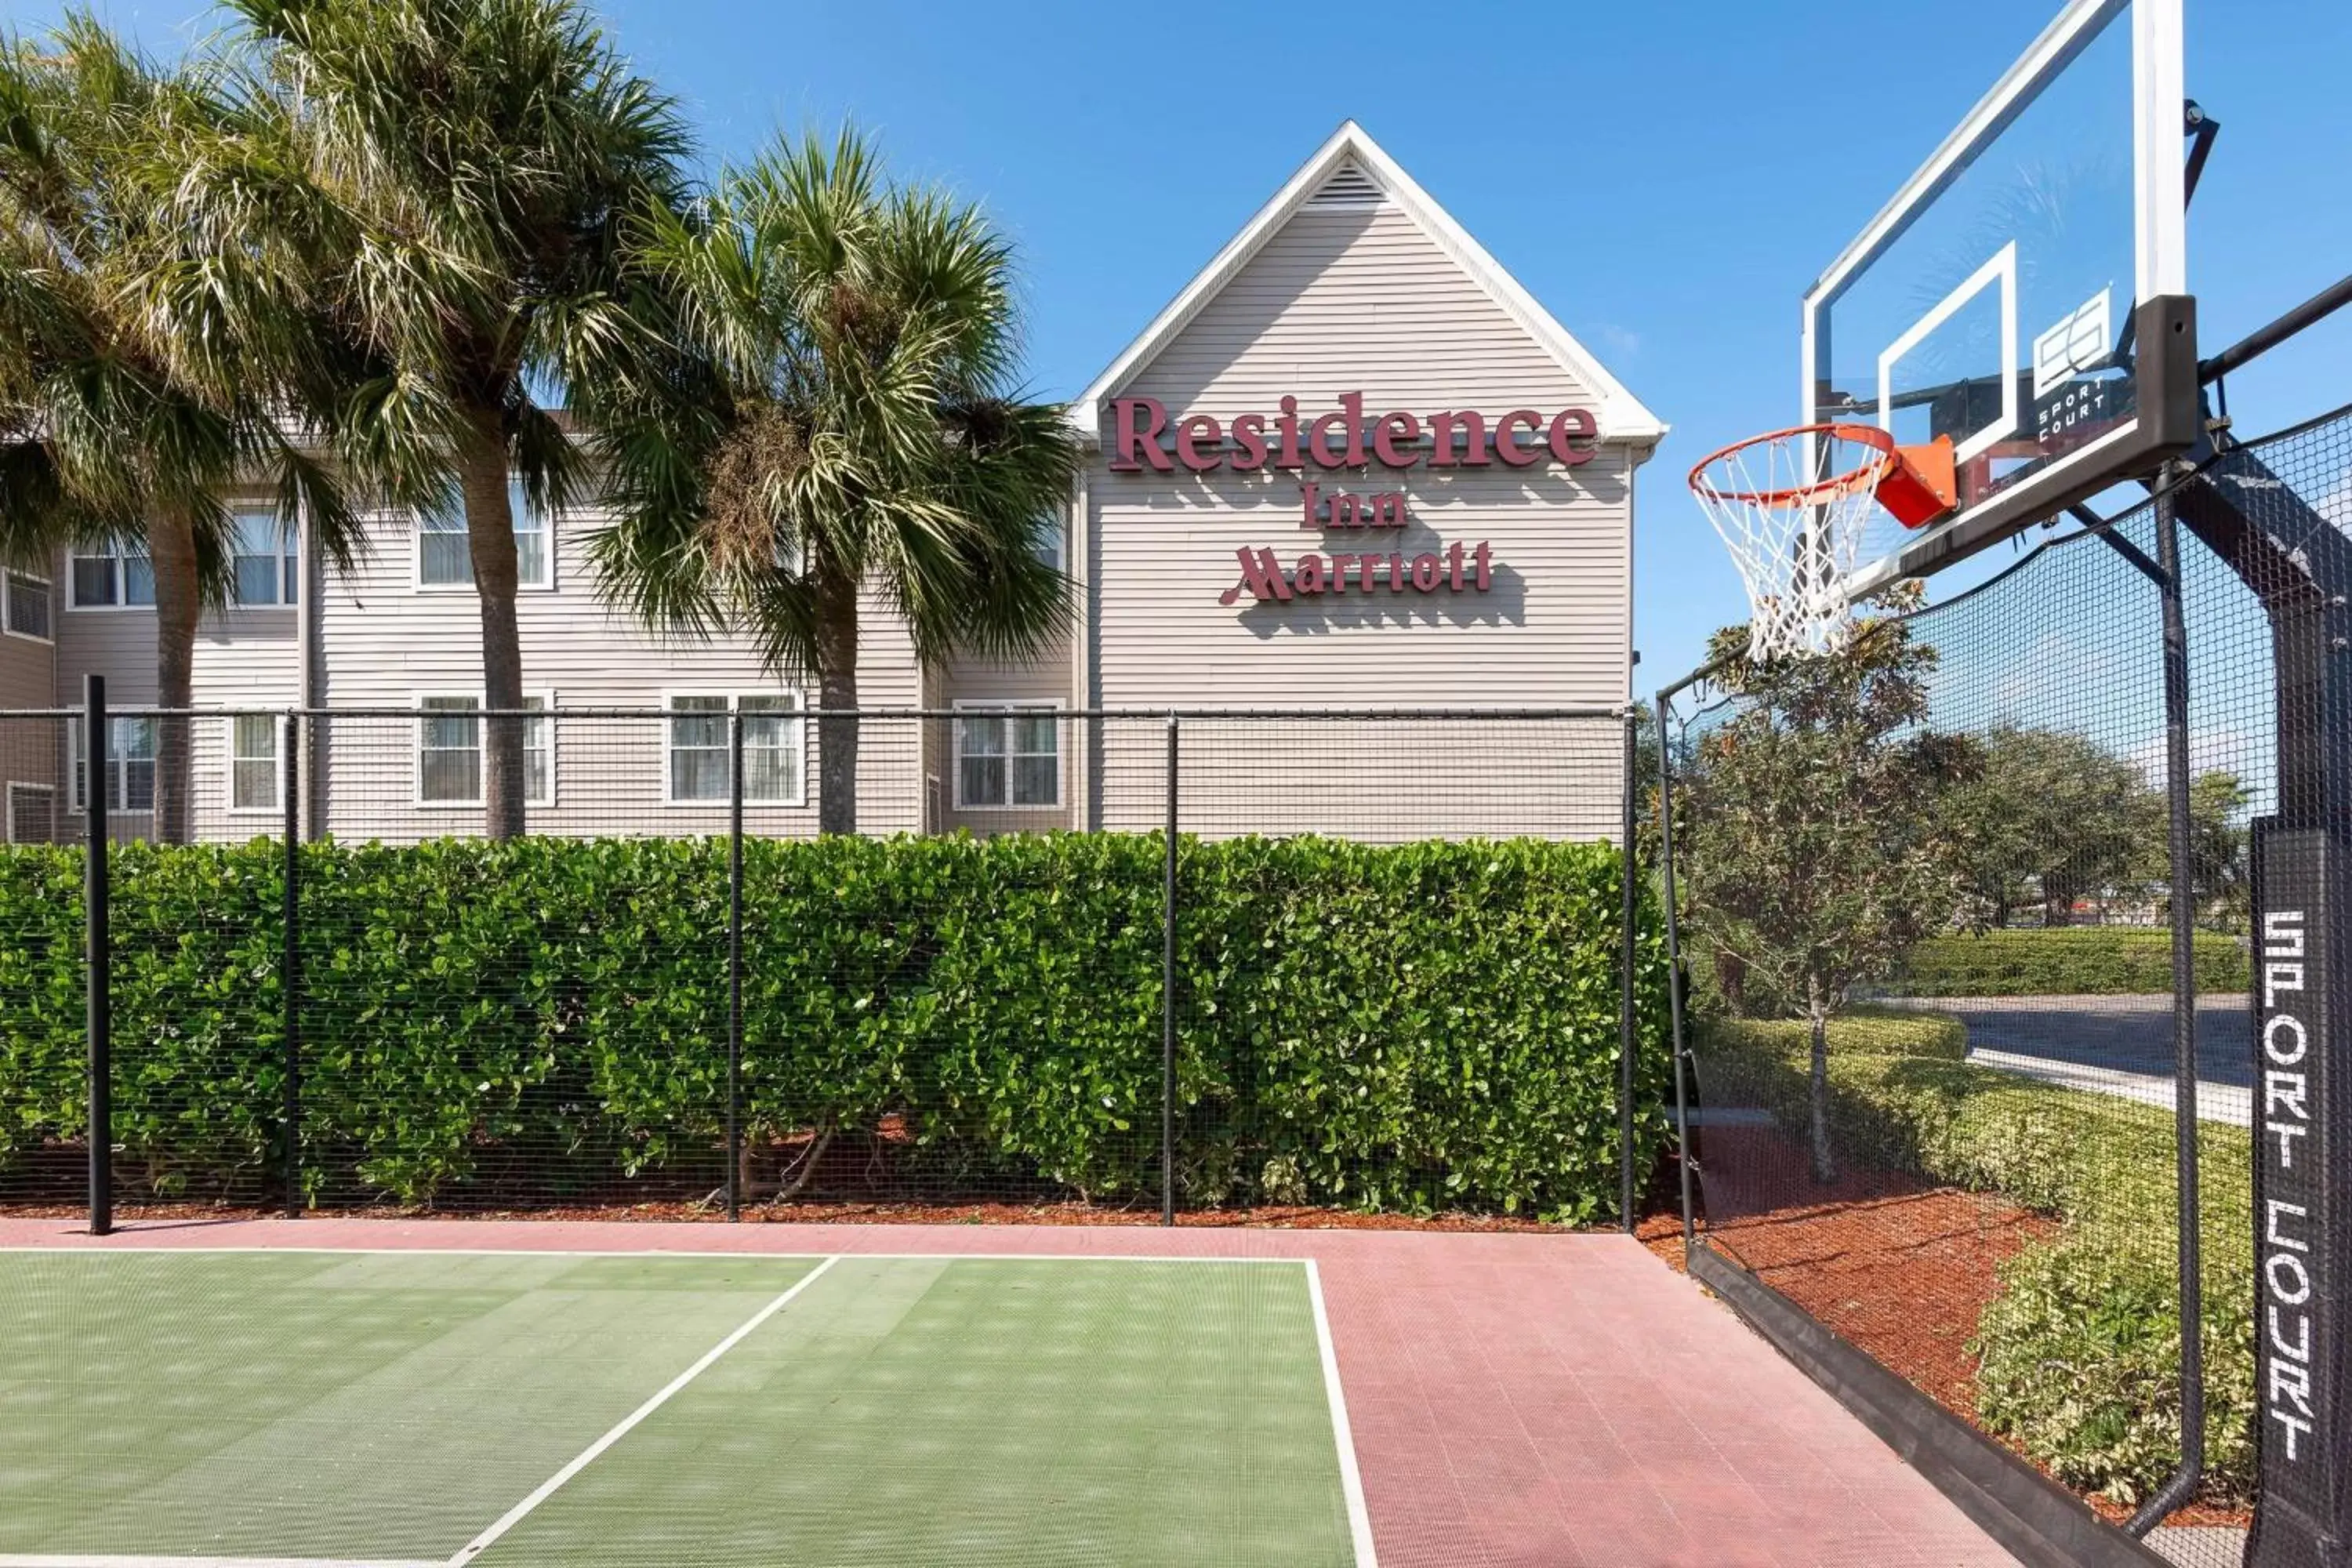 Fitness centre/facilities, Property Building in Residence Inn by Marriott Fort Myers